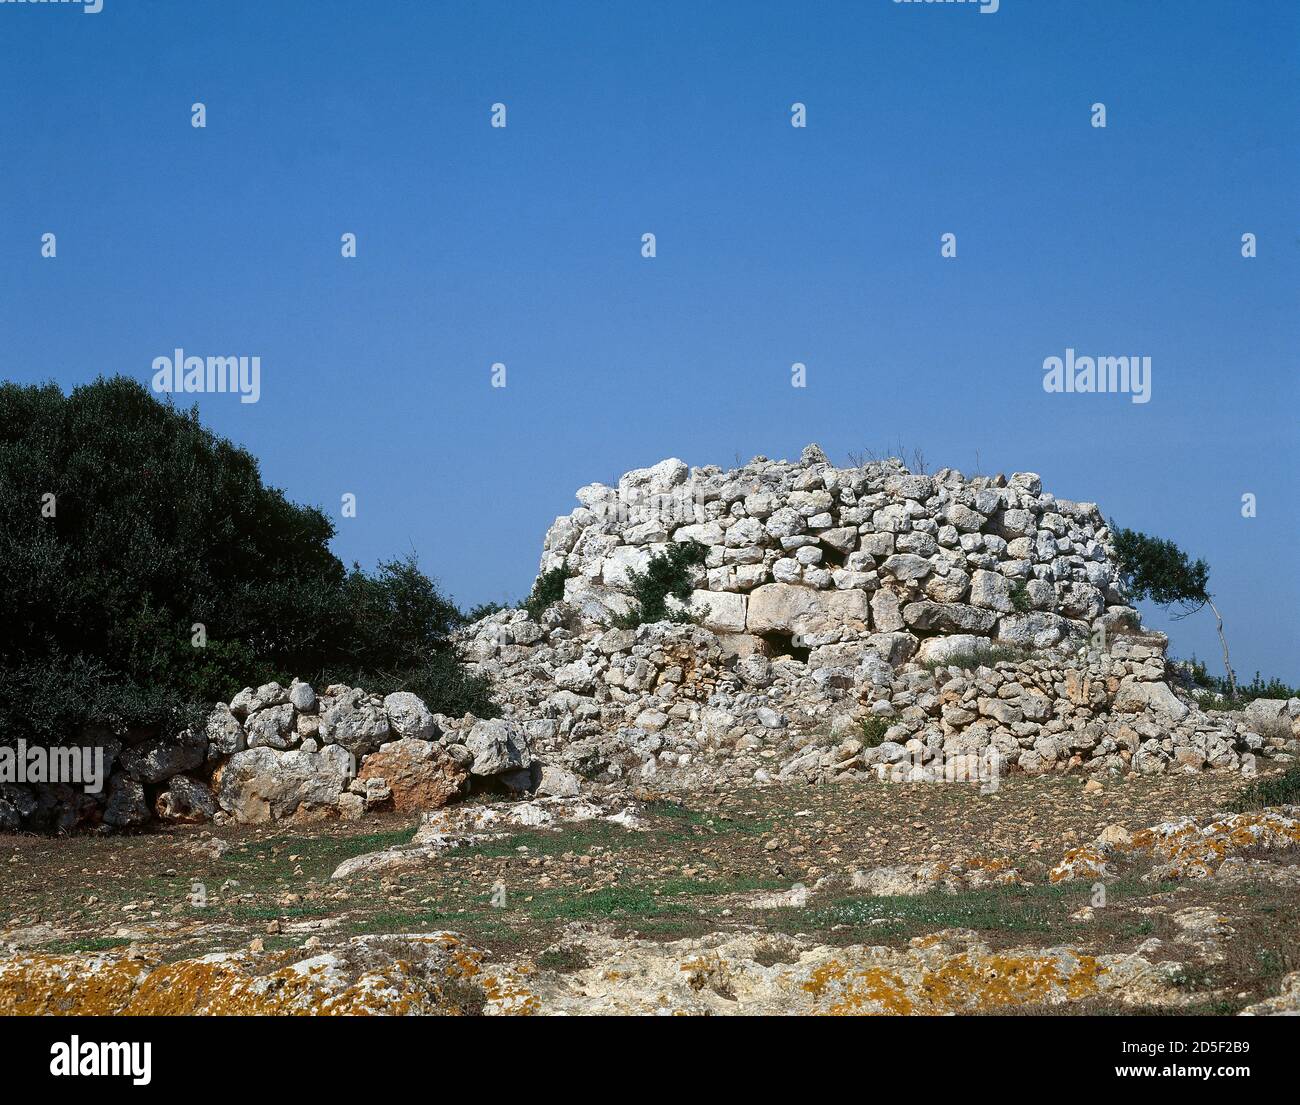 Spain, Balearic Islands, Menorca, Es Migjorn Gran. Talayotic settlement in the village of Sant Agusti Vell. Talayot. Bronze Age. Cyclopean architecture that the Balearic Islands' first settlers developed in the region from the 15th century BC.e Stock Photo